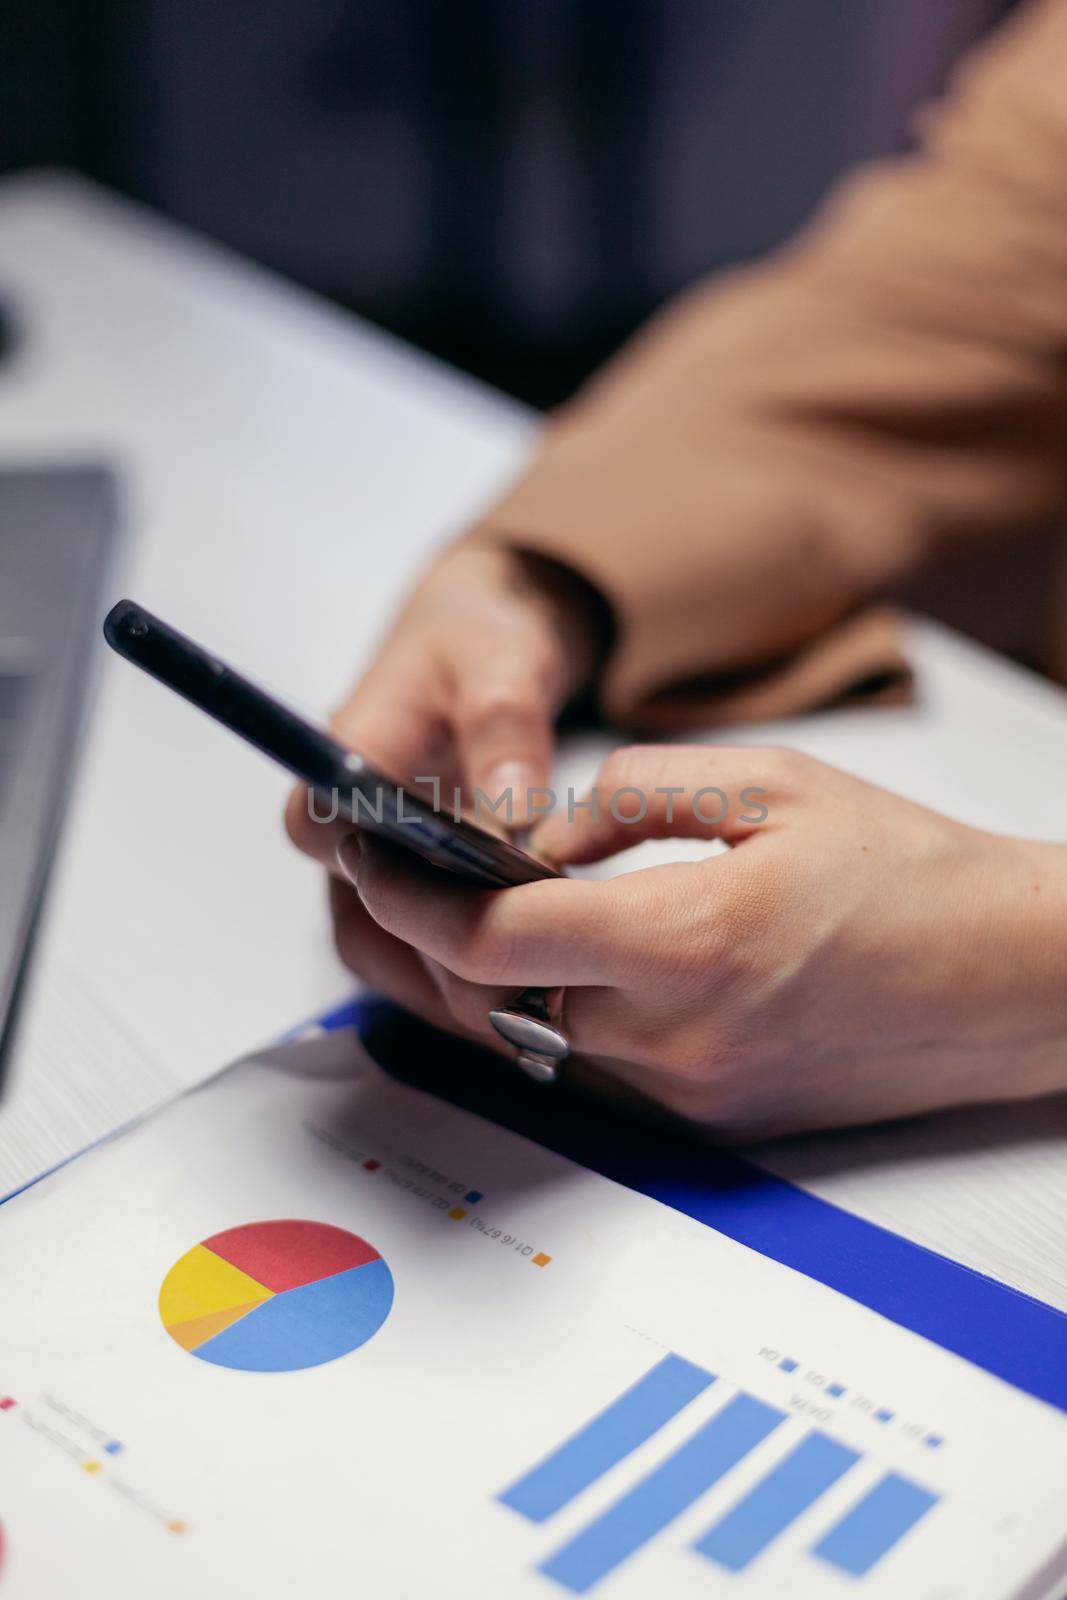 Close up of entrepreneur sending sms holding phone sitting at workplace in the evening. Businesswoman texting late at night while working on important project using smartphone .